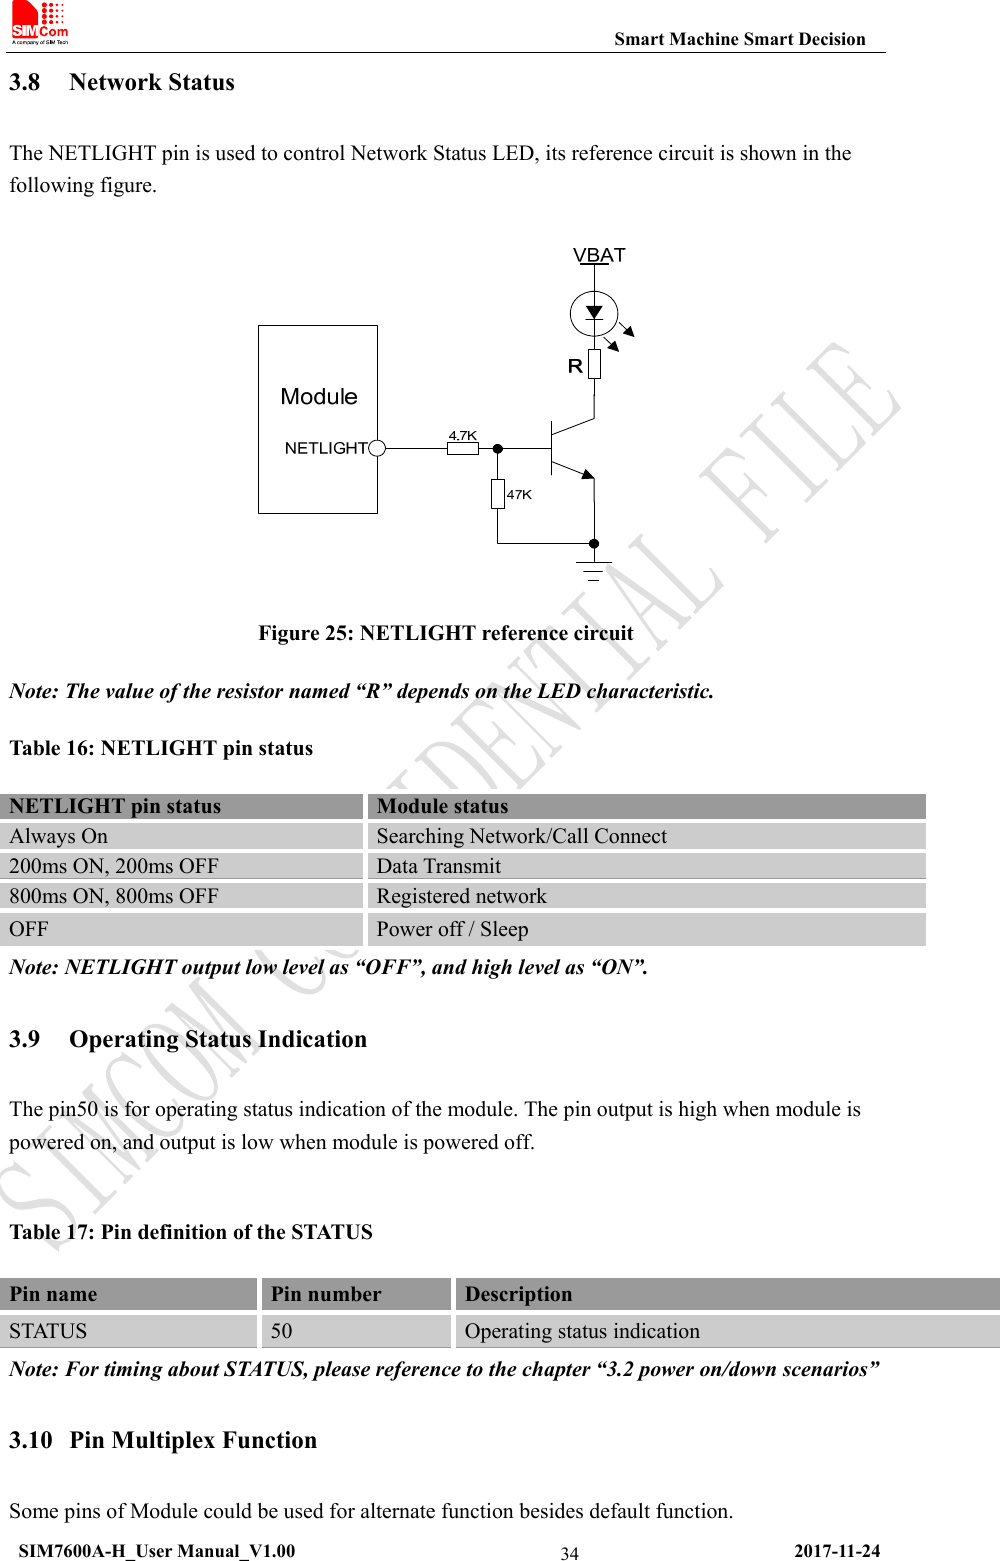                                                           Smart Machine Smart Decision  SIM7600A-H_User Manual_V1.00                                                     2017-11-24 343.8 Network Status The NETLIGHT pin is used to control Network Status LED, its reference circuit is shown in the following figure.   Figure 25: NETLIGHT reference circuit Note: The value of the resistor named “R” depends on the LED characteristic. Table 16: NETLIGHT pin status NETLIGHT pin status    Module status Always On  Searching Network/Call Connect 200ms ON, 200ms OFF  Data Transmit 800ms ON, 800ms OFF  Registered network OFF  Power off / Sleep Note: NETLIGHT output low level as “OFF”, and high level as “ON”. 3.9 Operating Status Indication The pin50 is for operating status indication of the module. The pin output is high when module is powered on, and output is low when module is powered off.  Table 17: Pin definition of the STATUS Pin name  Pin number  Description STATUS  50  Operating status indication Note: For timing about STATUS, please reference to the chapter “3.2 power on/down scenarios” 3.10 Pin Multiplex Function Some pins of Module could be used for alternate function besides default function. 